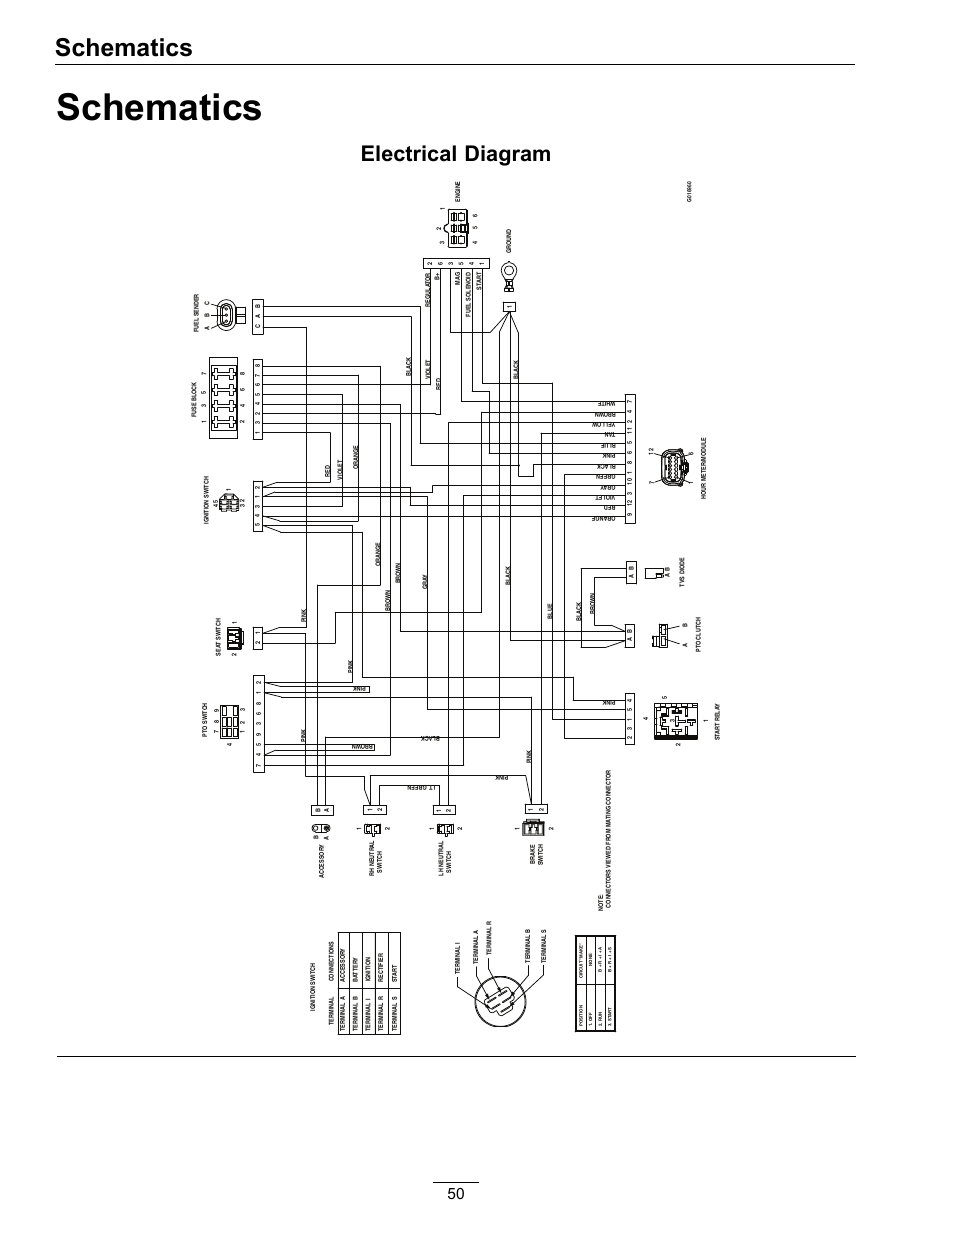 Chevy C10 Ignition Switch Wiring : what wires to connect voltmeter to